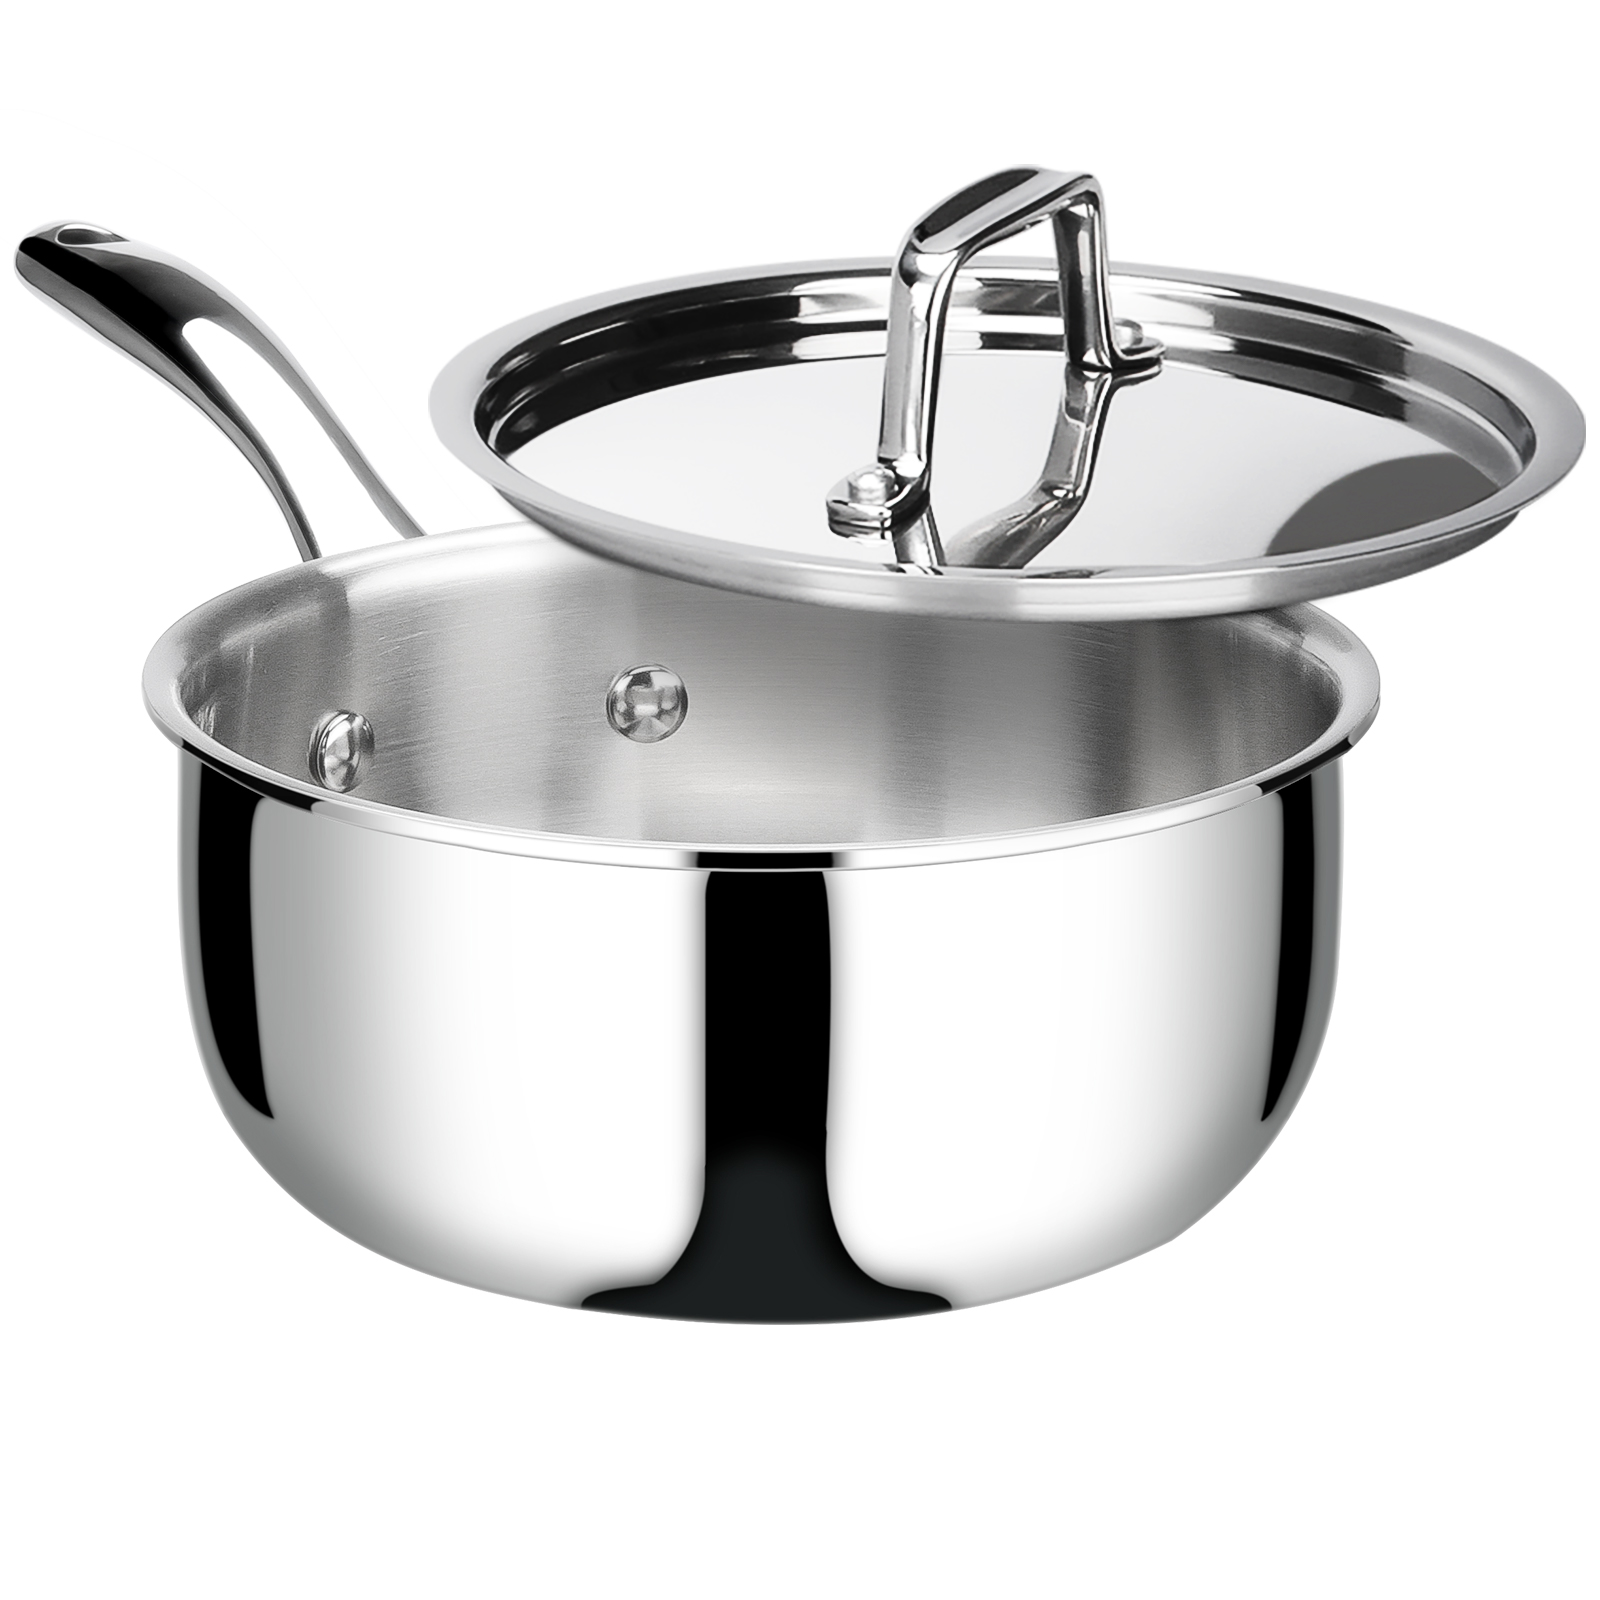 Glendaveny Tri-Ply Stainless Steel Sauce Pan with Lid, 3-Quart Saucepan  Sauce Pot Multipurpose Use for Home Kitchen or Restaurant - Kitchen Cookware,  Induction Pot, Dishwasher Safe & Oven Safe 